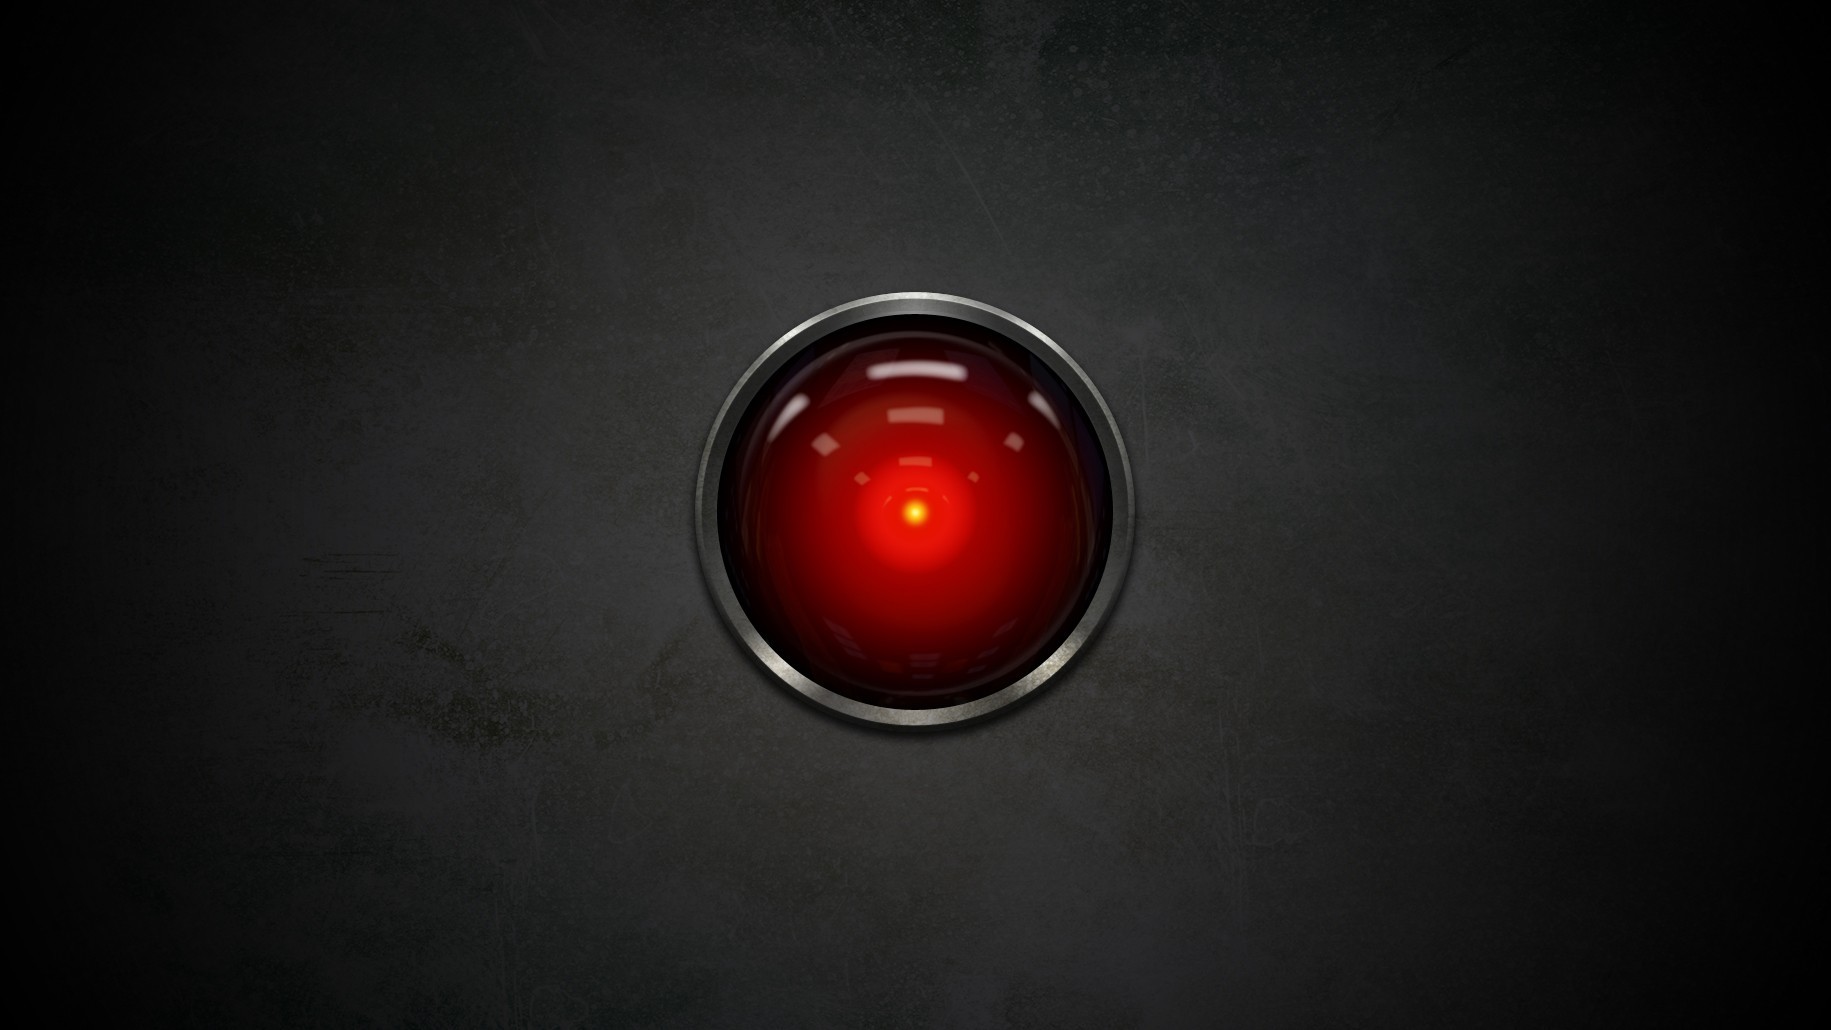 General 1831x1030 science fiction robot HAL 9000 2001: A Space Odyssey movies